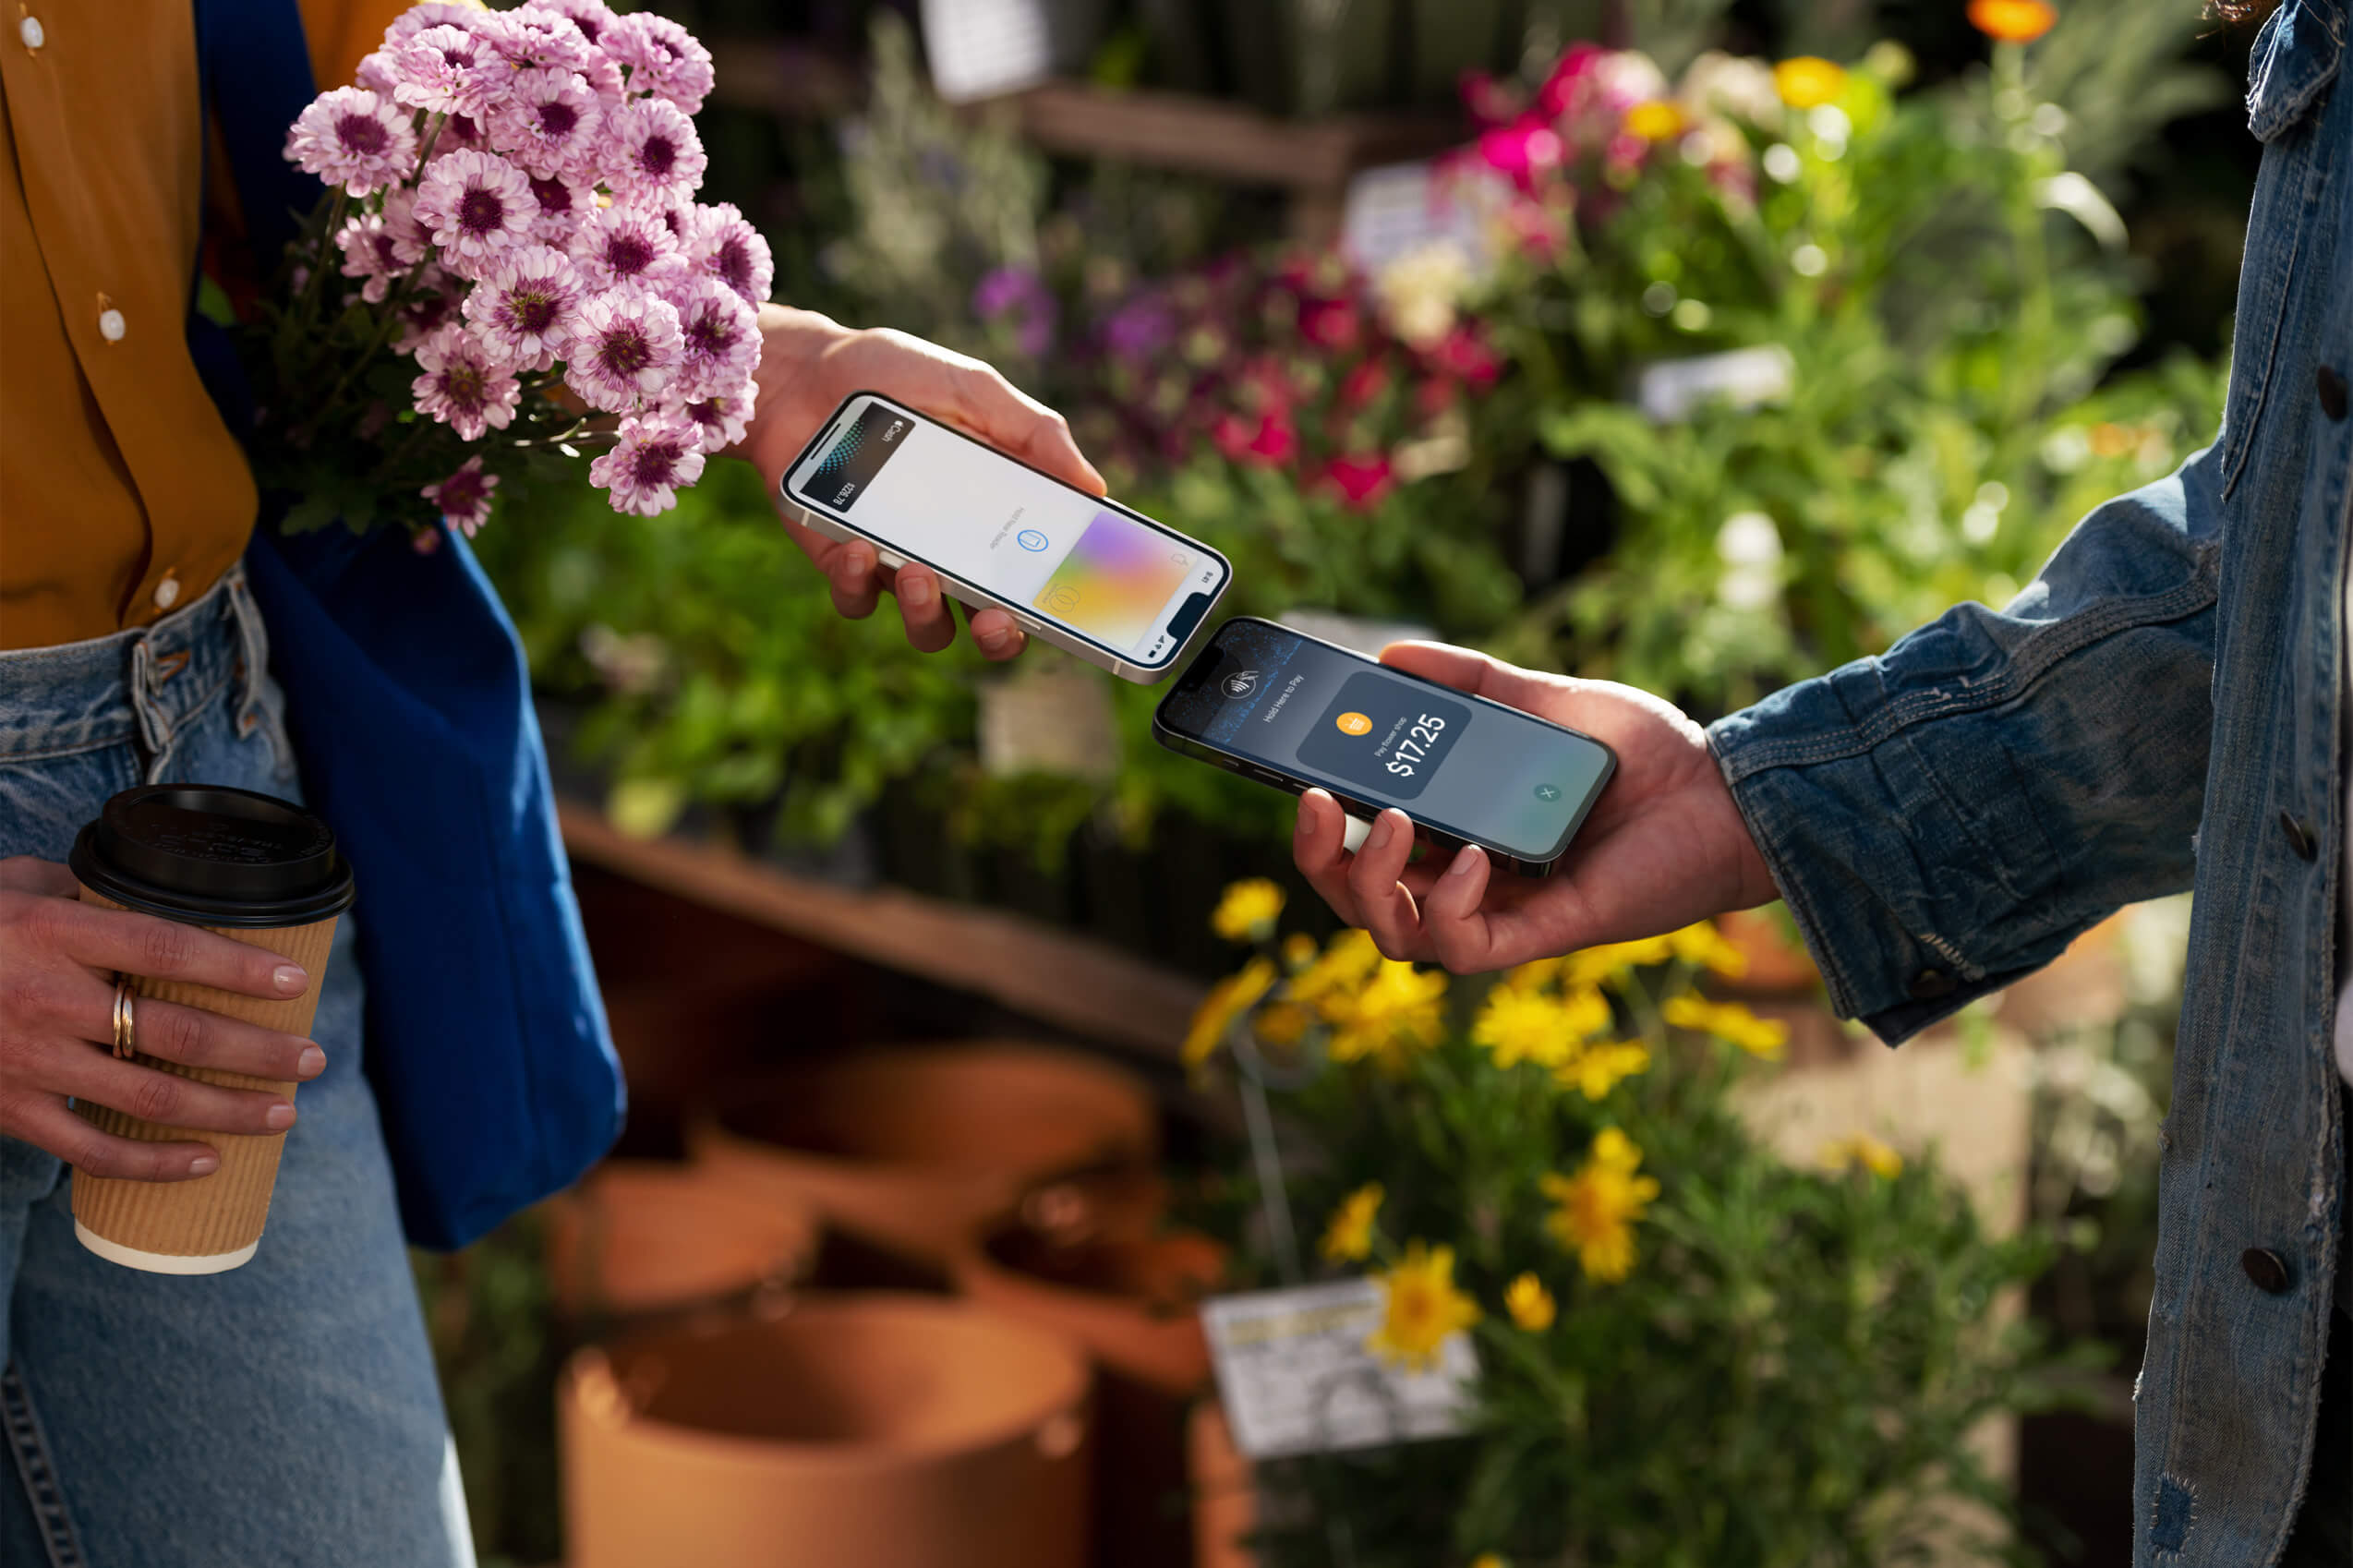 apple-soon-allow-businesses-to-use-iphones-to-accept-contactless-payments-report